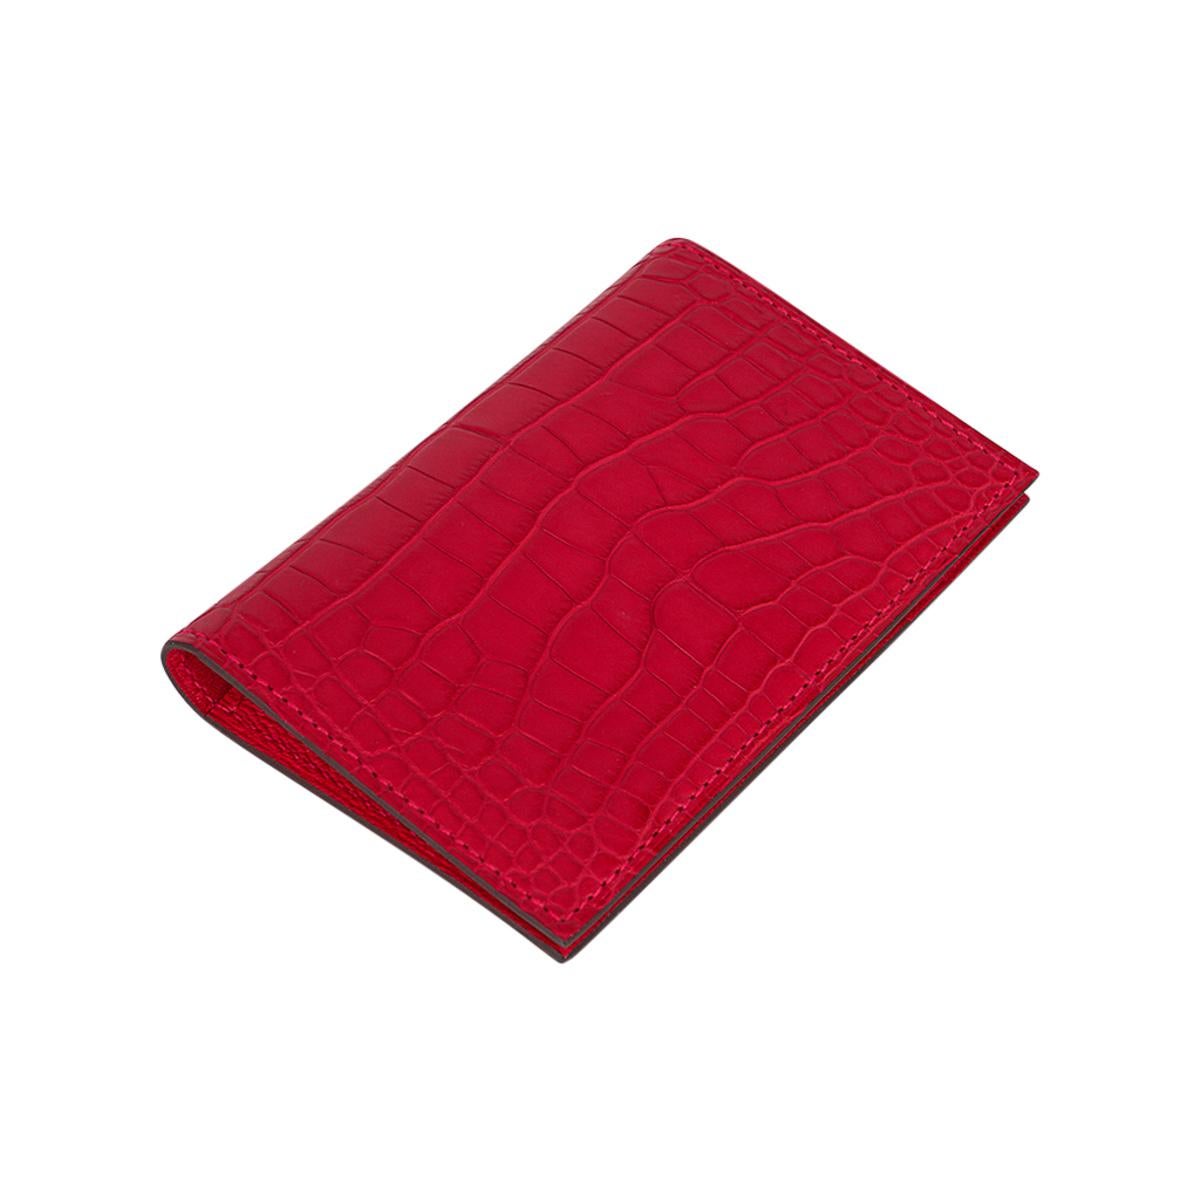 Mightychic offers an Hermes MC2 Euclid Card Case featured in Rose Extreme Matte Alligator.
The card holder has 4 slots for business / credit cards and 2 pockets.
Comes with signature Hermes box.
New or Store Fresh Condition.
final sale

CARD HOLDER